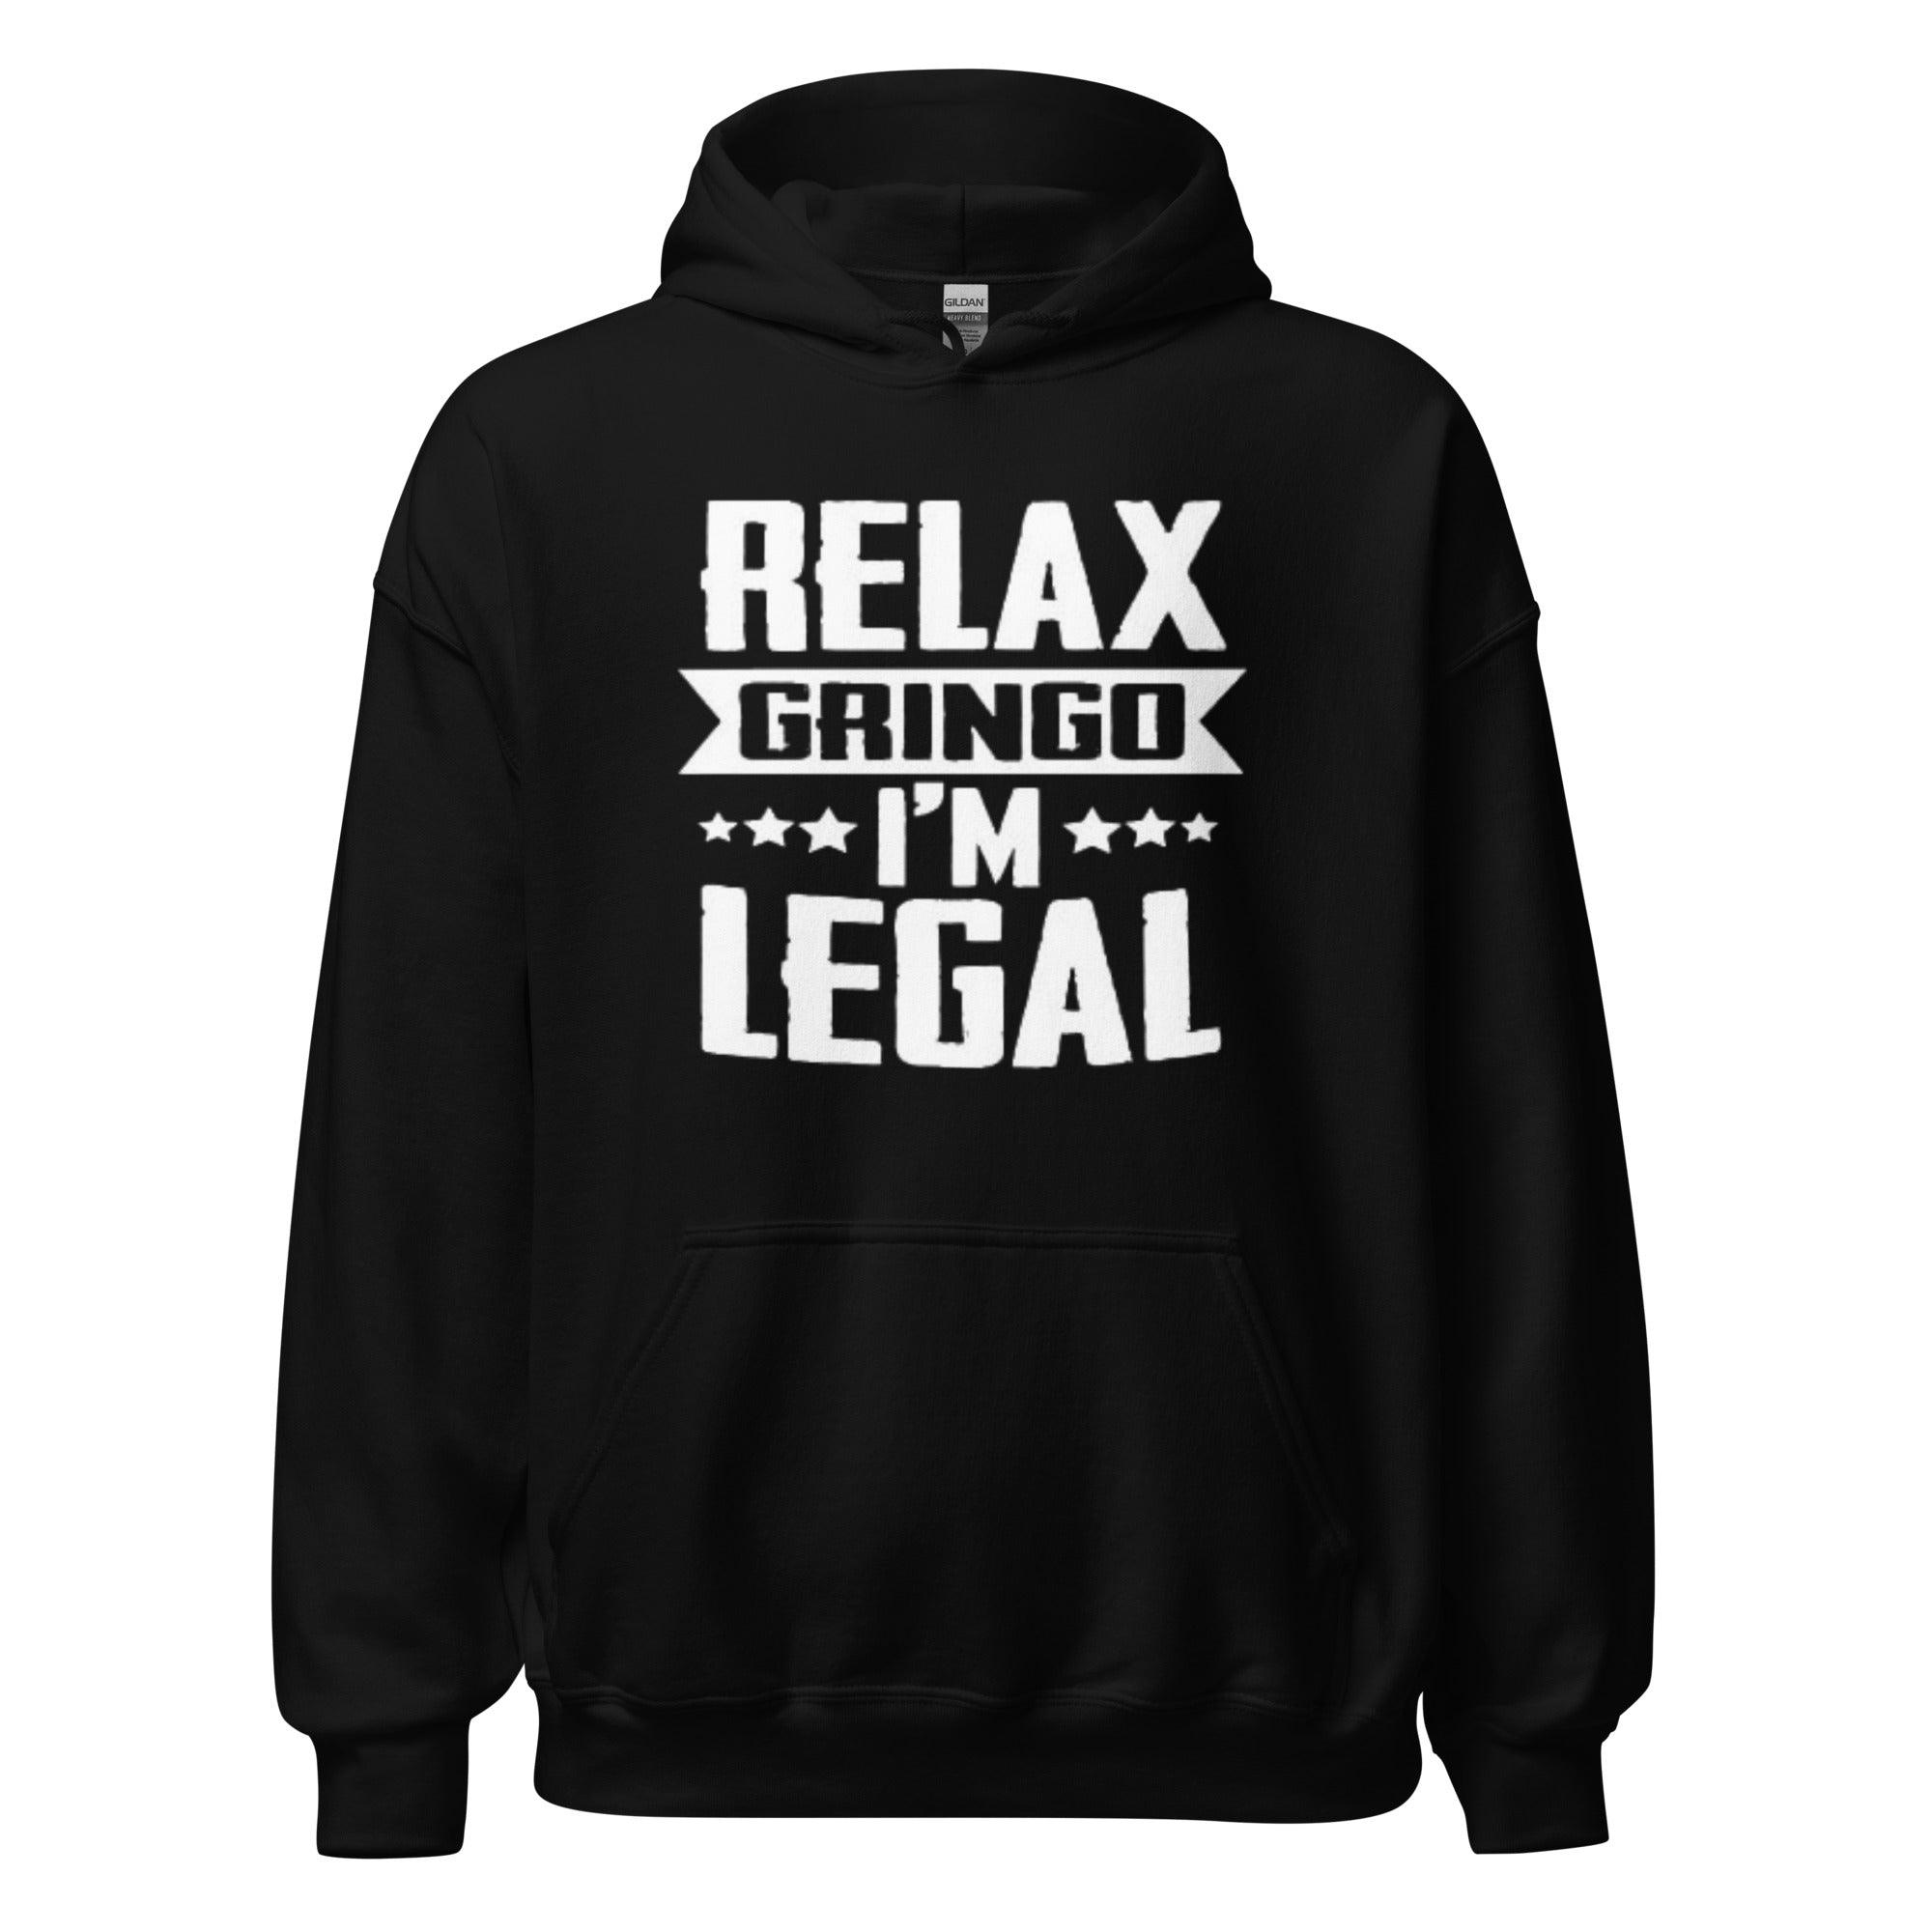 Humor Hoodie Relax Gringo I'm Legal Blended Cotton Midweight Unisex Pullover - TopKoalaTee